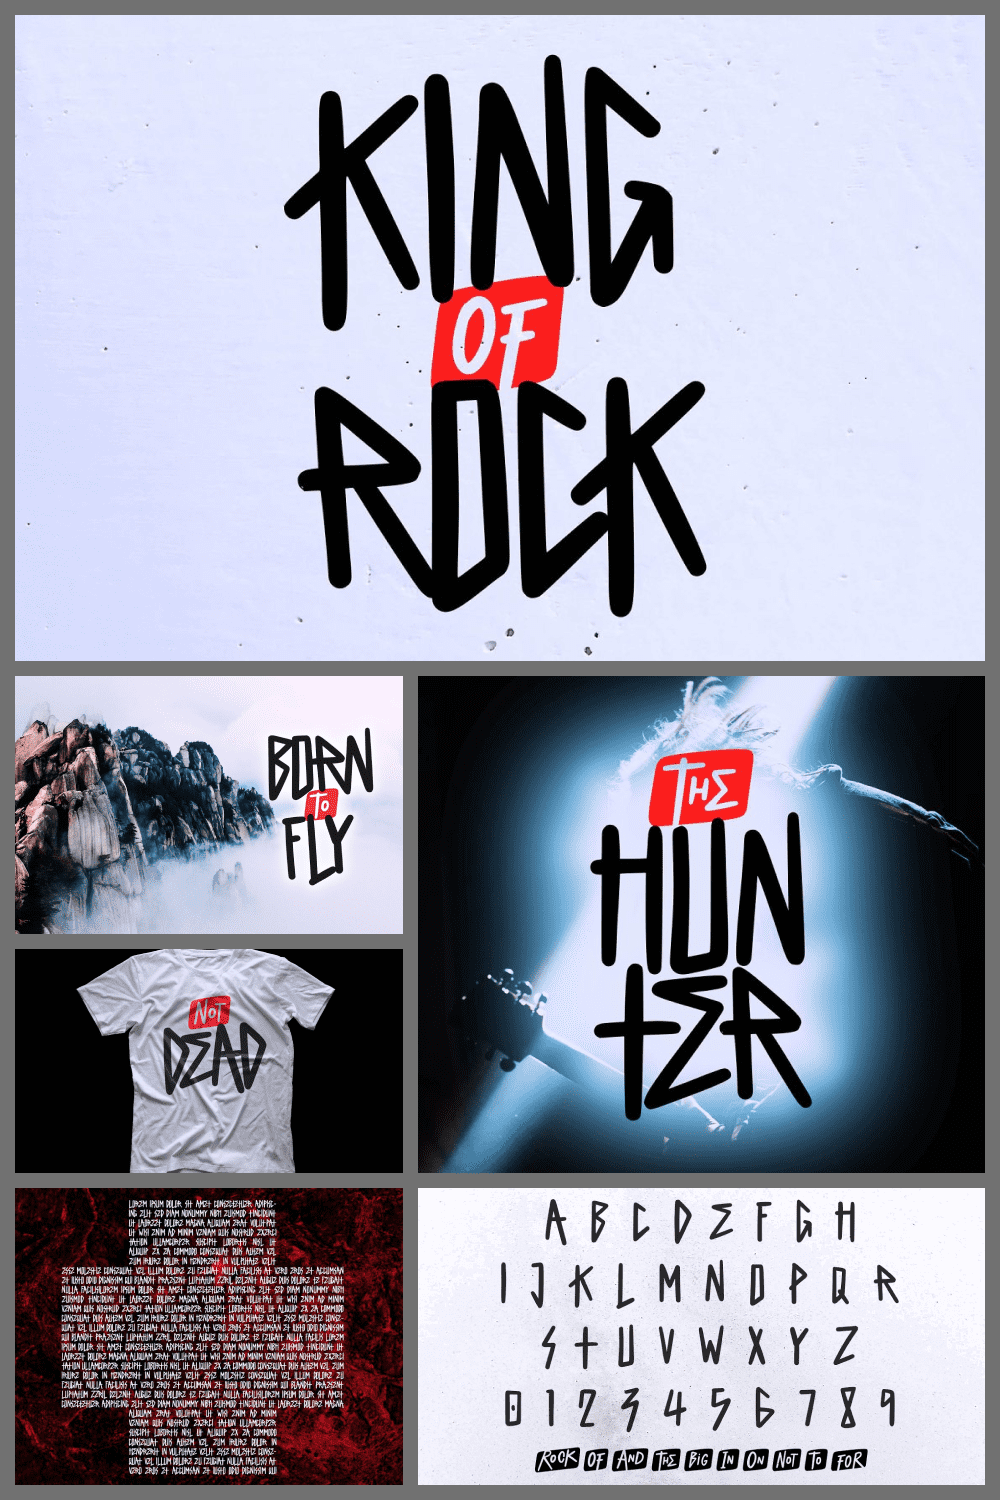 This is a decorative, heavy metal and punk rock music inspired modern typeface.